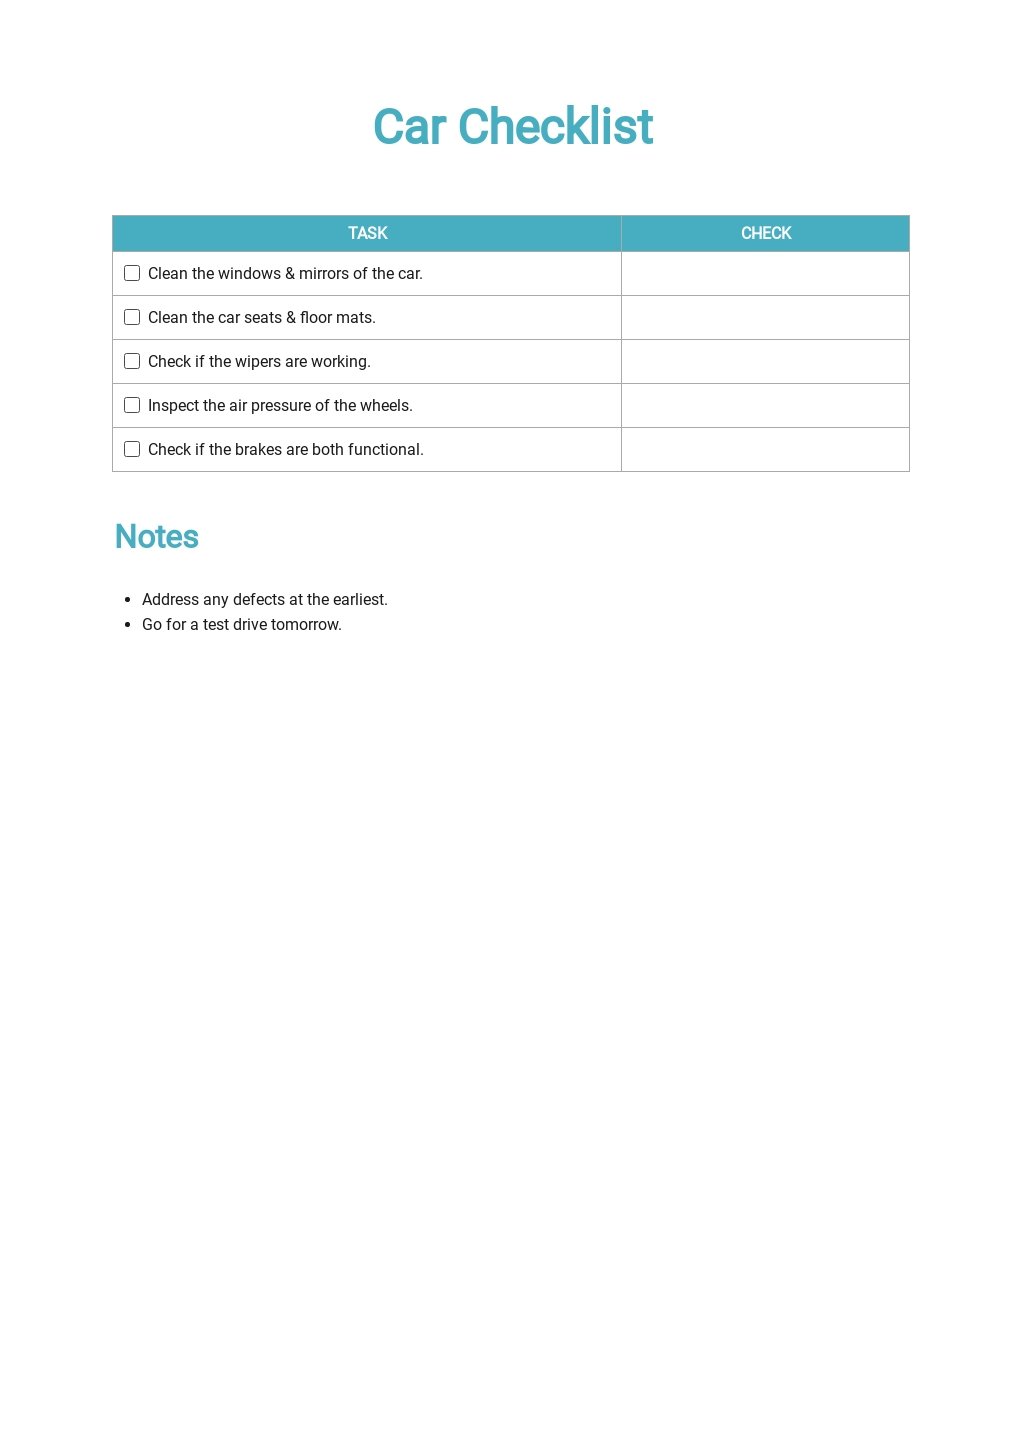 Car Cleaning Checklist Template in Google Docs, Word